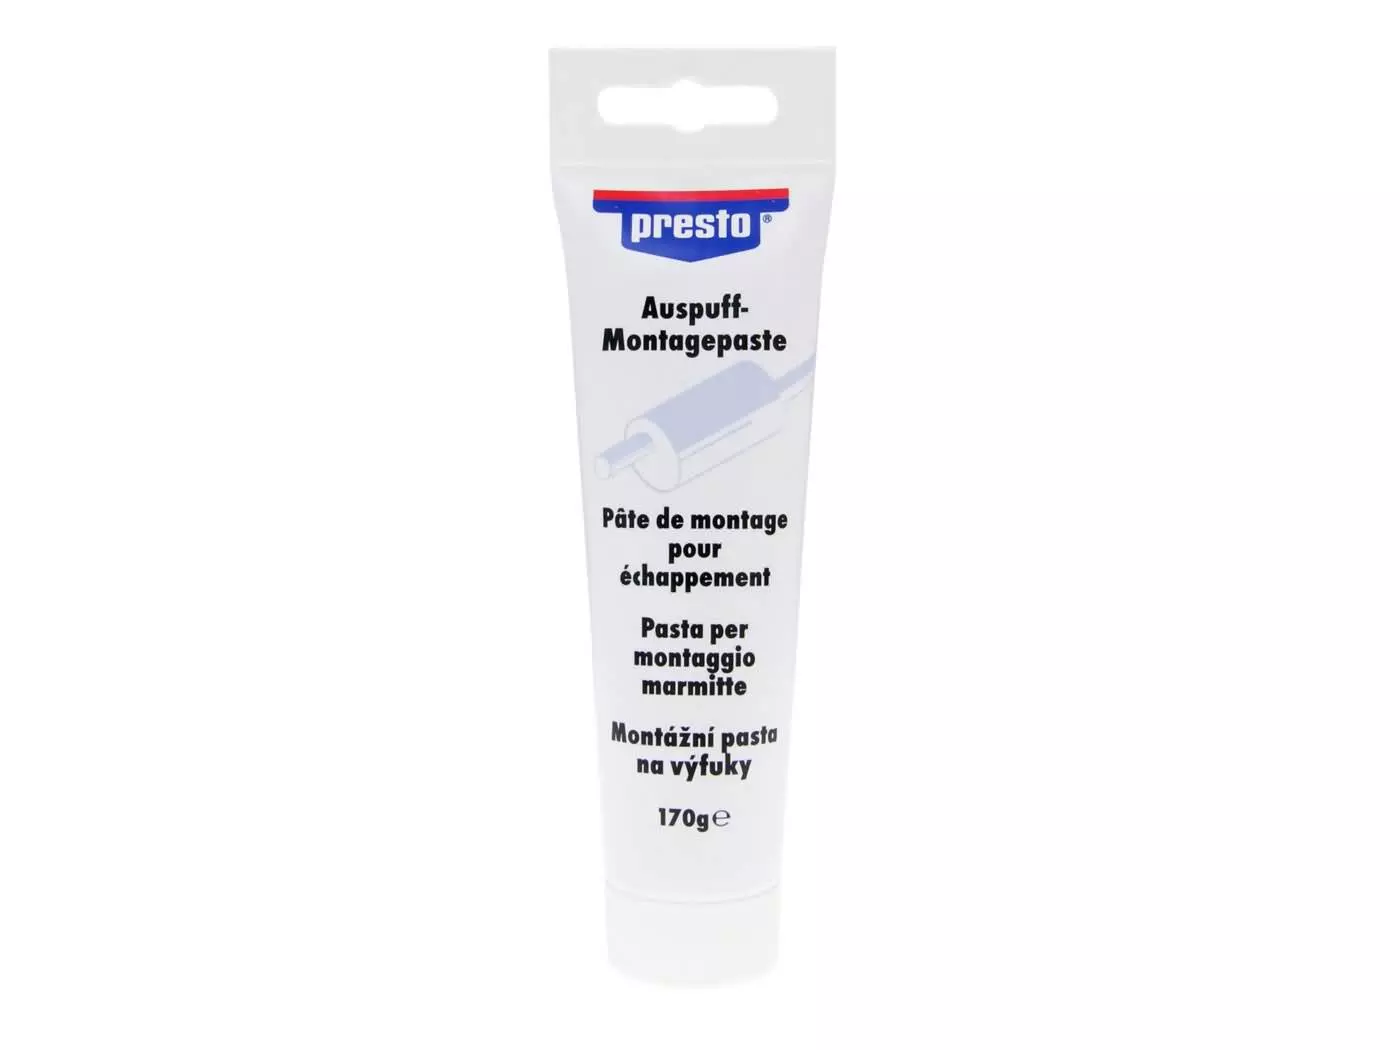 Exhaust Assembly Paste Presto 170g